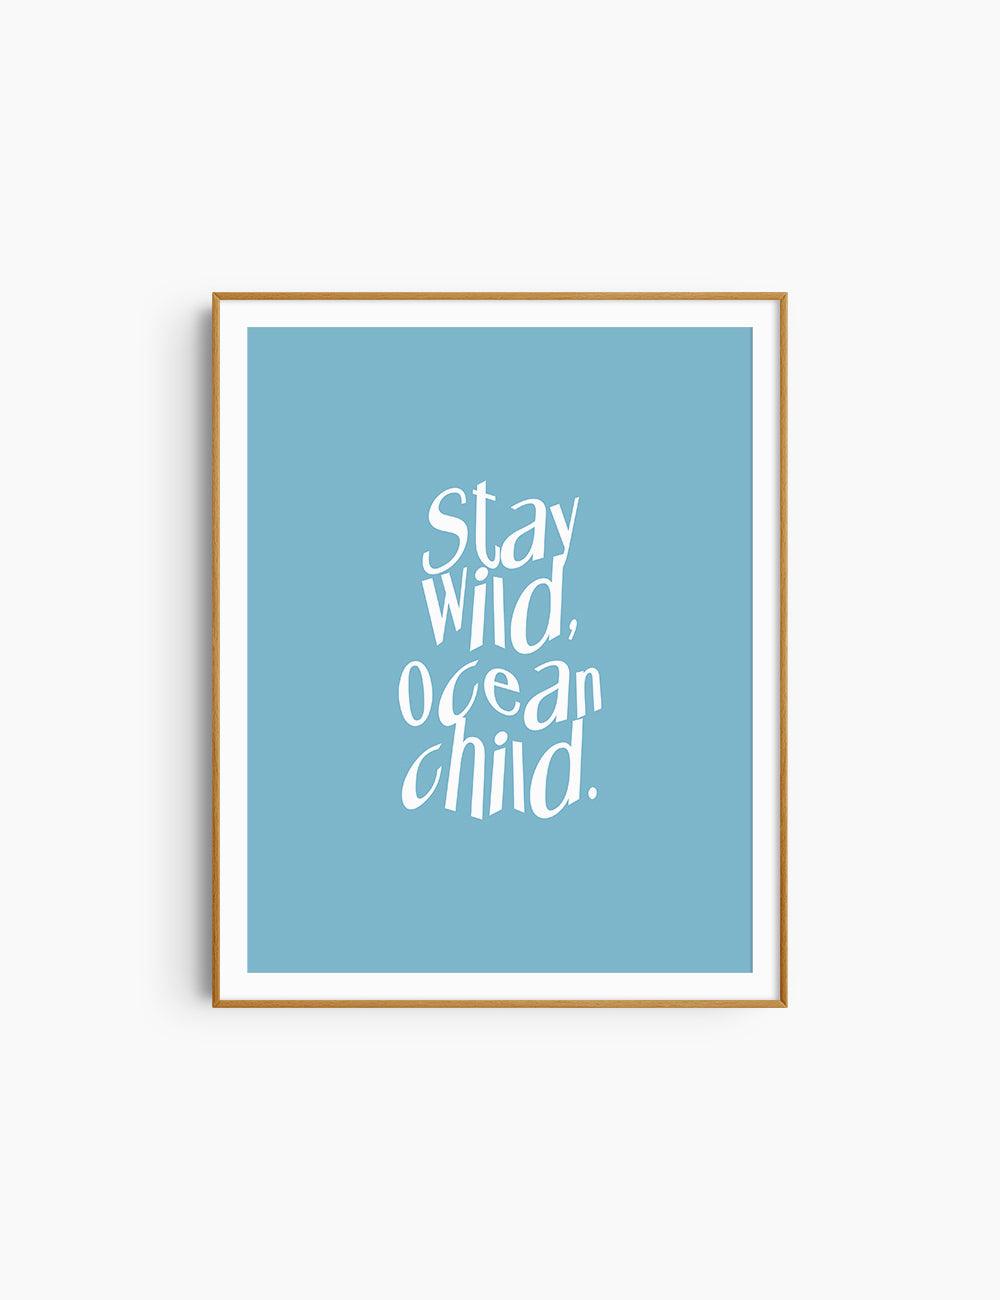 STAY WILD, OCEAN CHILD. Light Blue and White. Printable Wall Art Quote. 